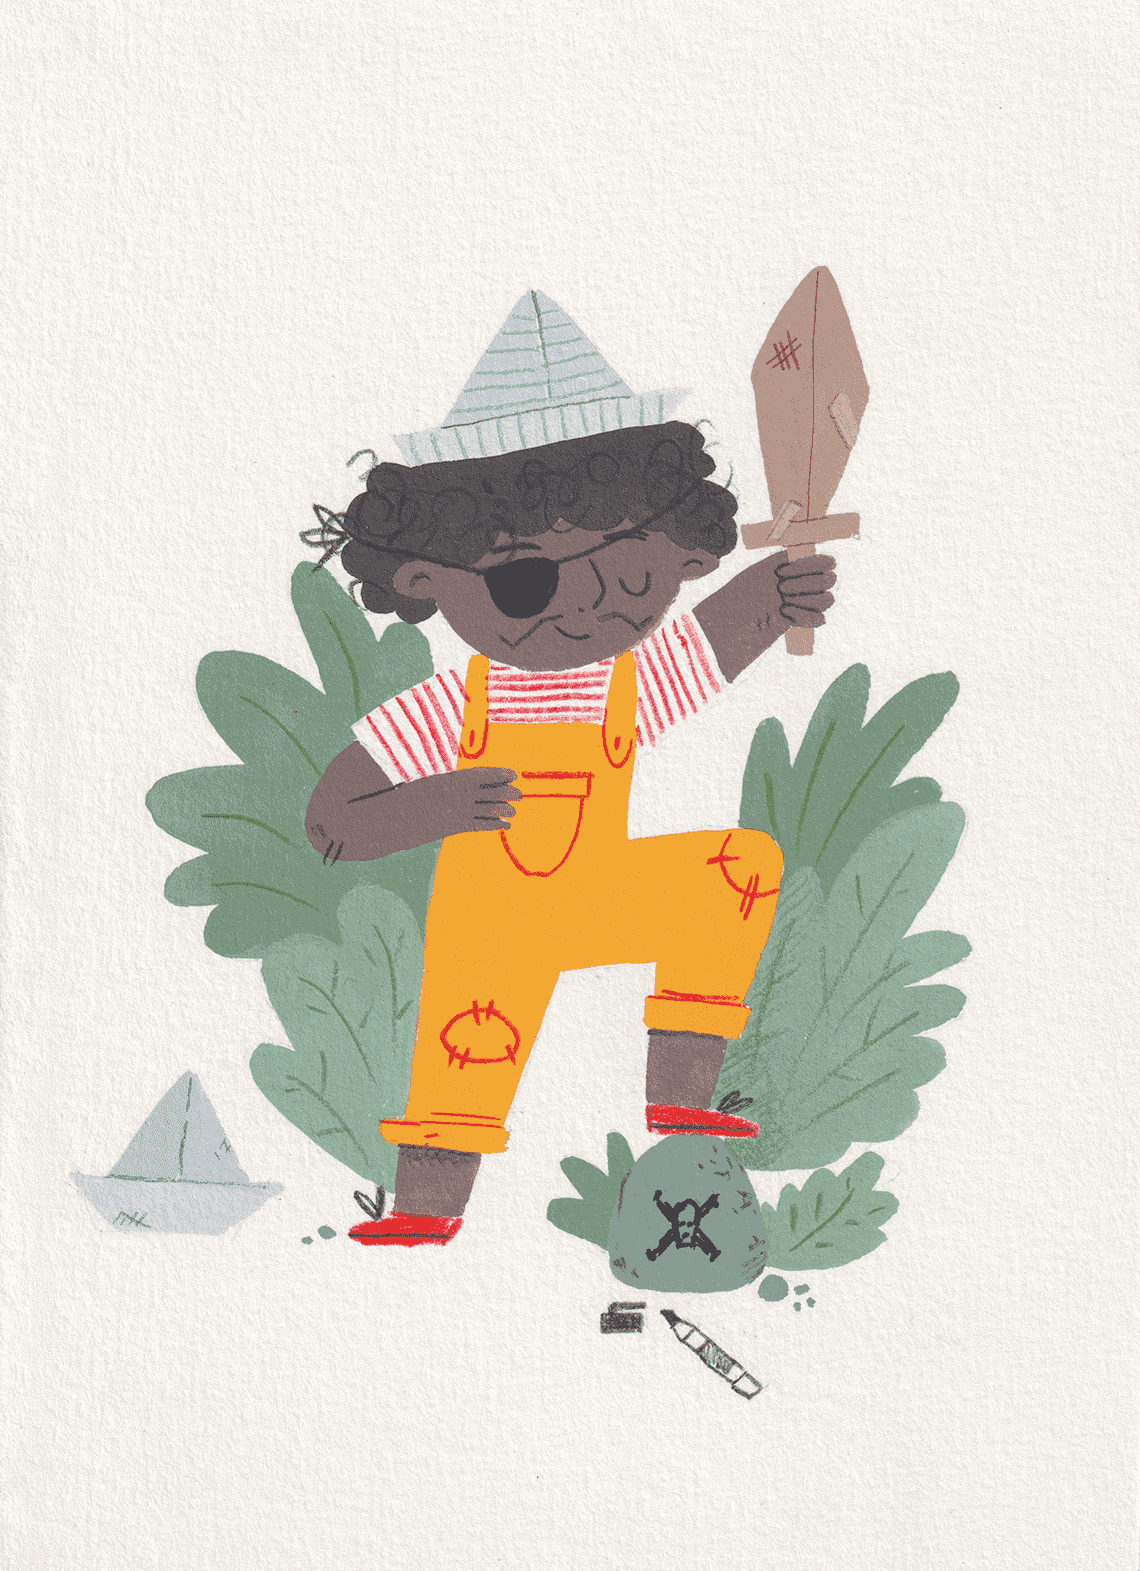 Gouache illustration of a boy dressed as a pirate holding a cardboard sword.